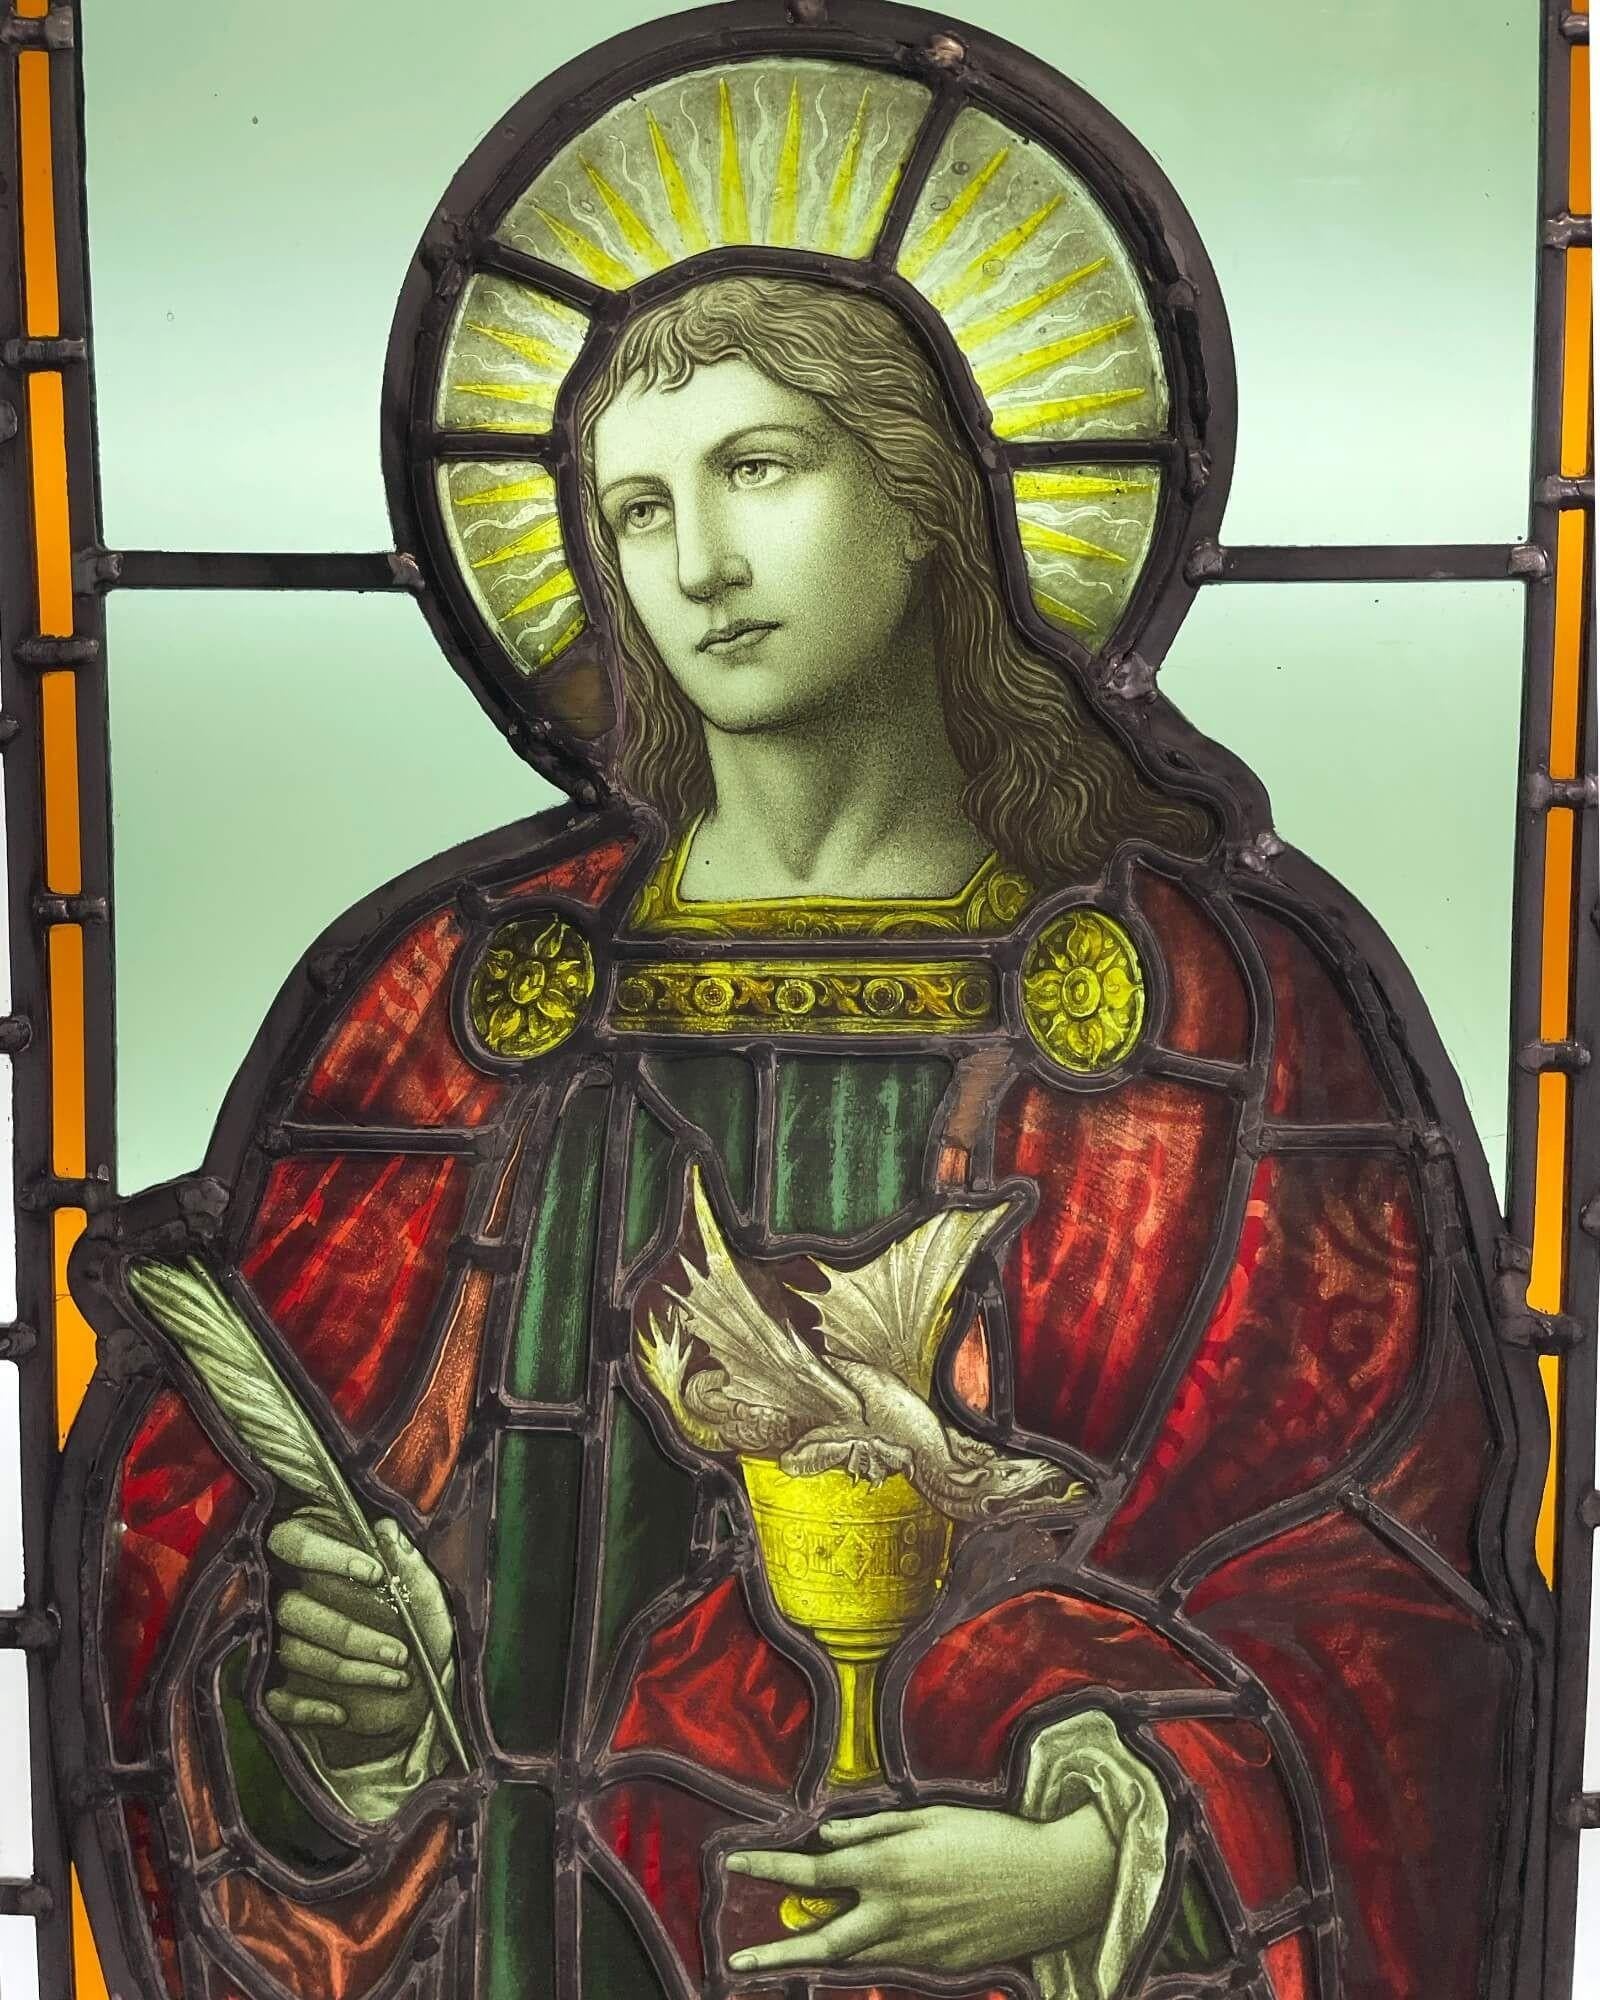 A large and impressive antique stained glass window depicting St John, the Evangelist, dating from circa 1860. In this stunning glasswork piece, the Saint is depicted in vibrant red drapery, a feathered quill in one hand – representing his role as